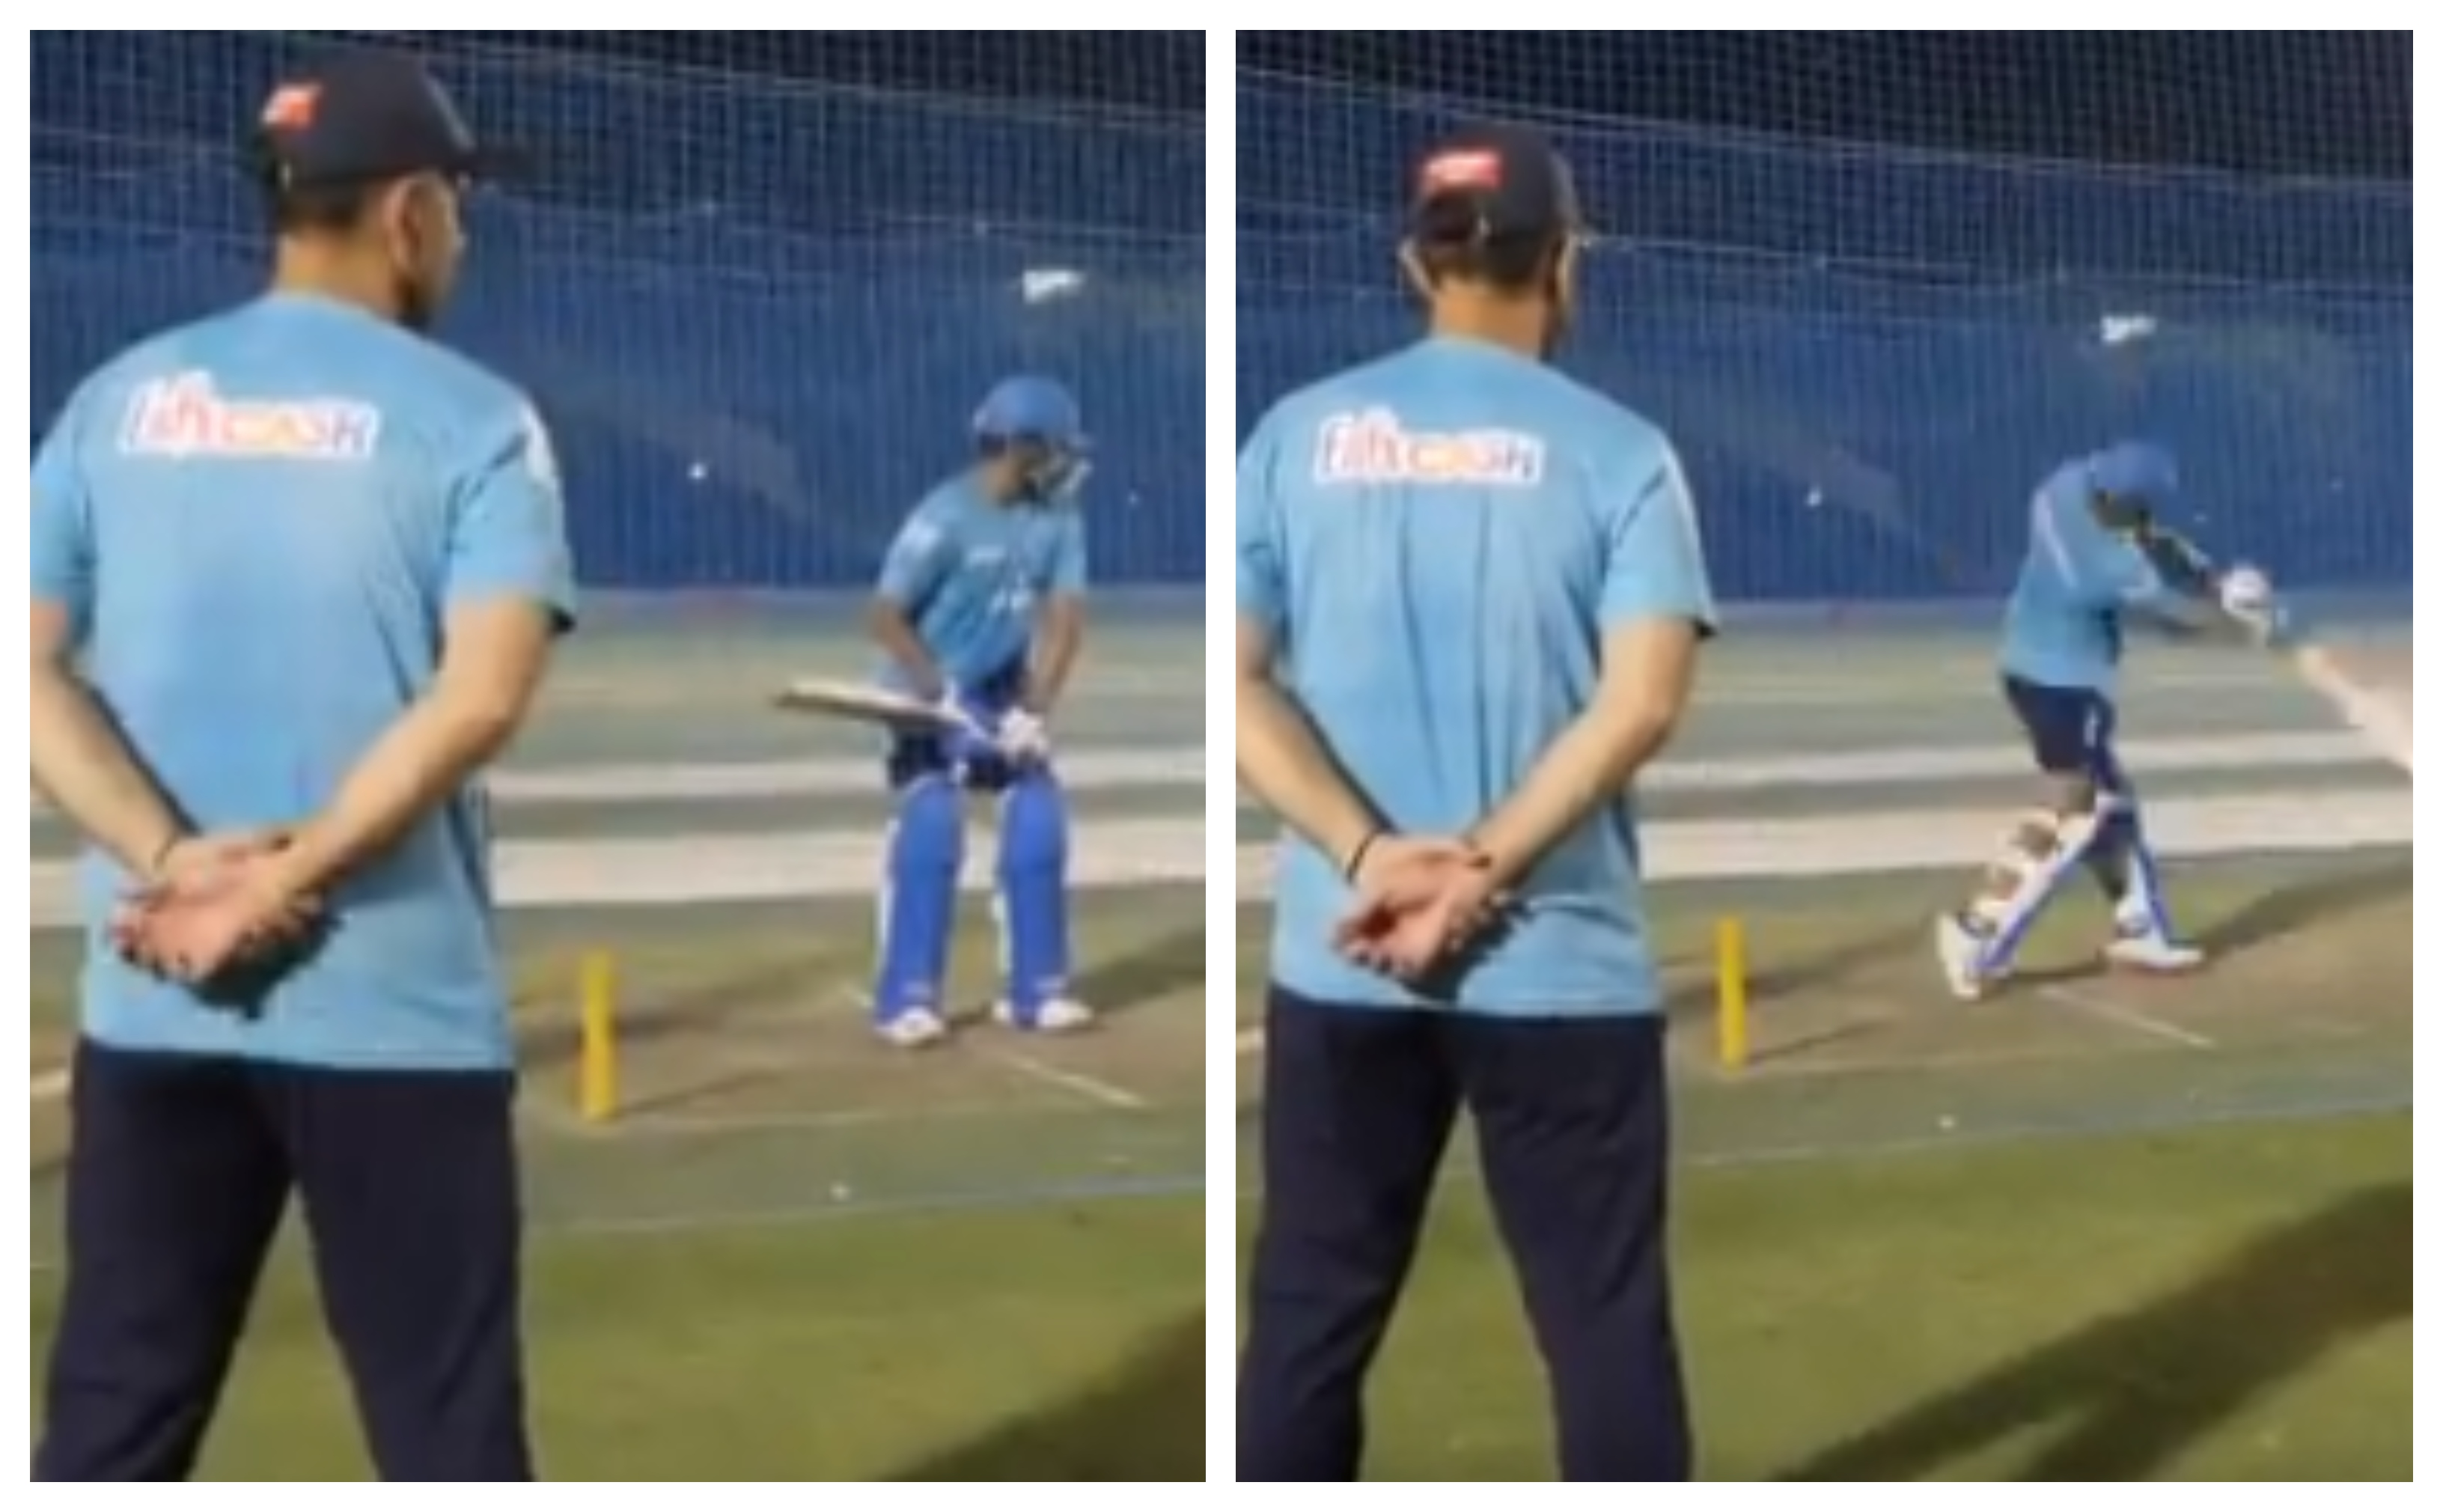 Ricky Ponting watches closely as Prithvi Shaw bats in the nets | Screengrab